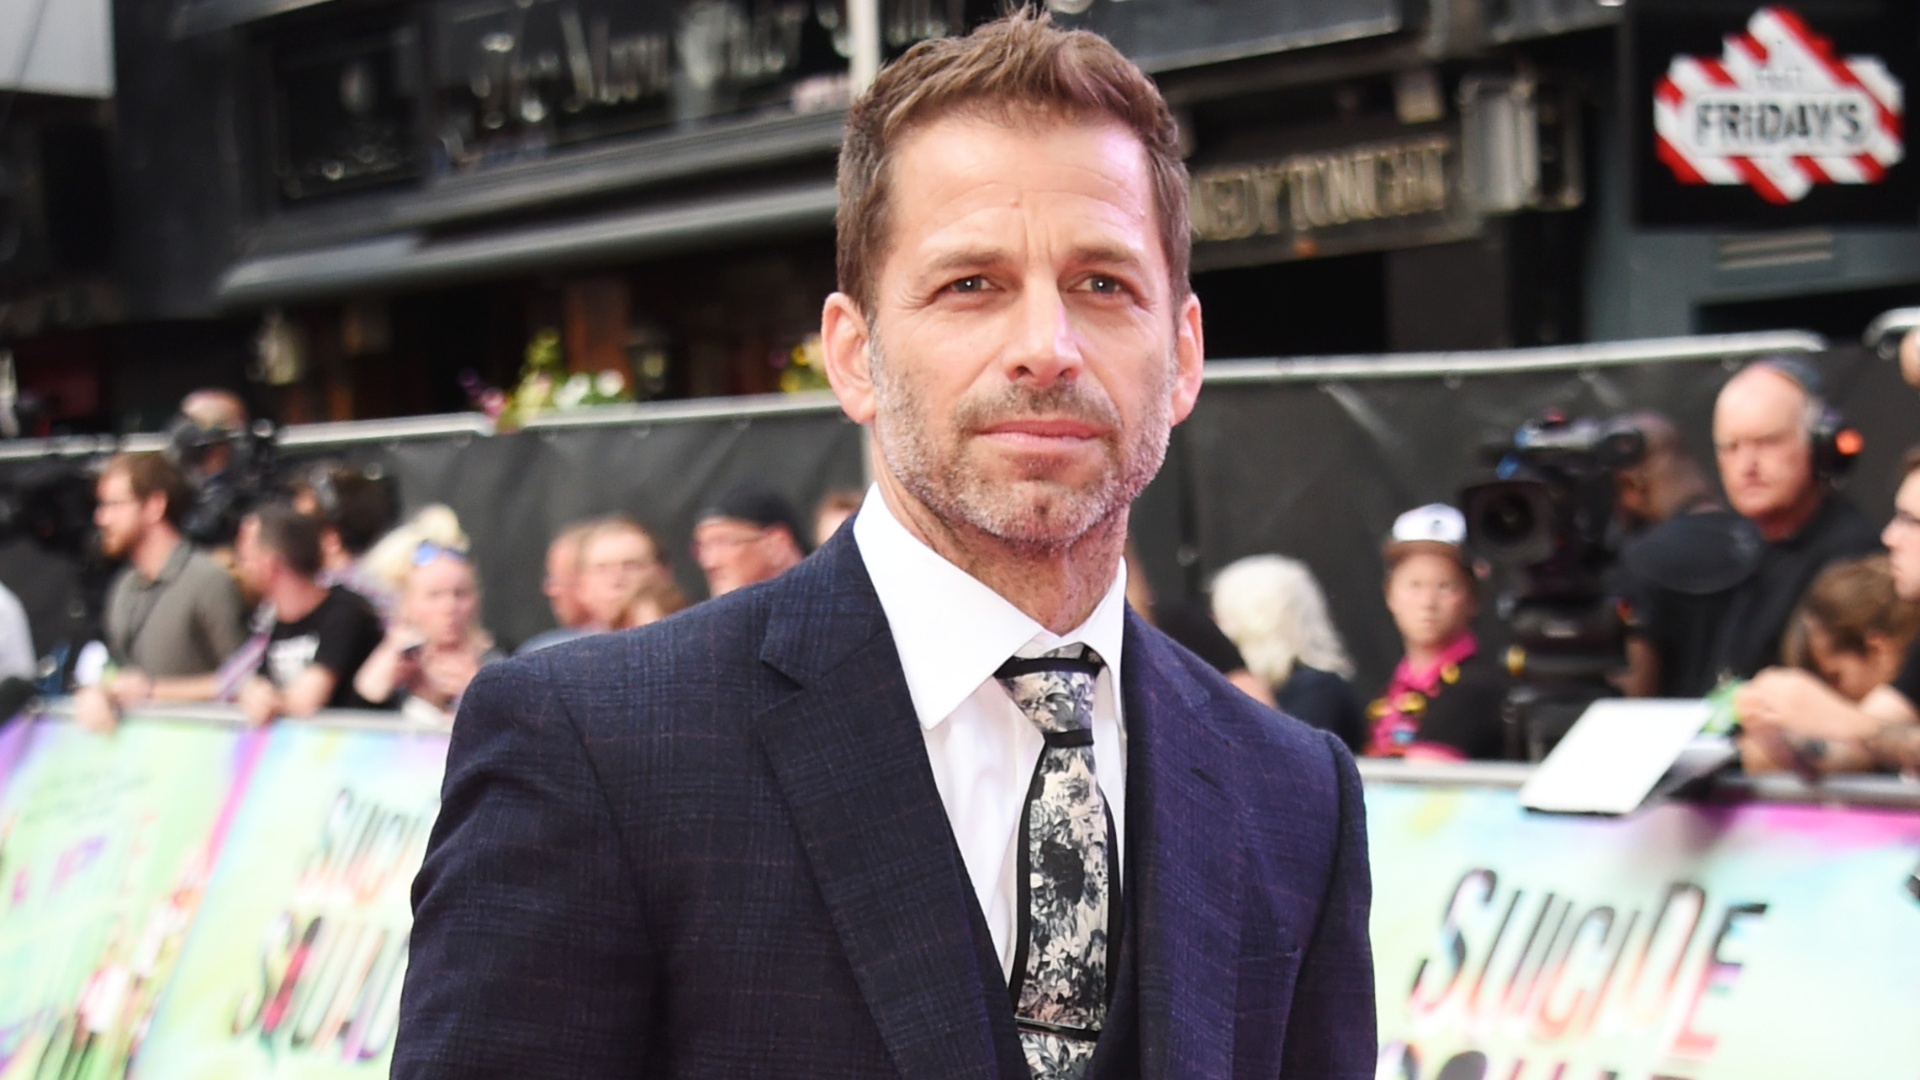 'Justice League' Director Zack Snyder Responds to 'Toxic Fandom' Criticism: 'It's Just a Bunch of BS'